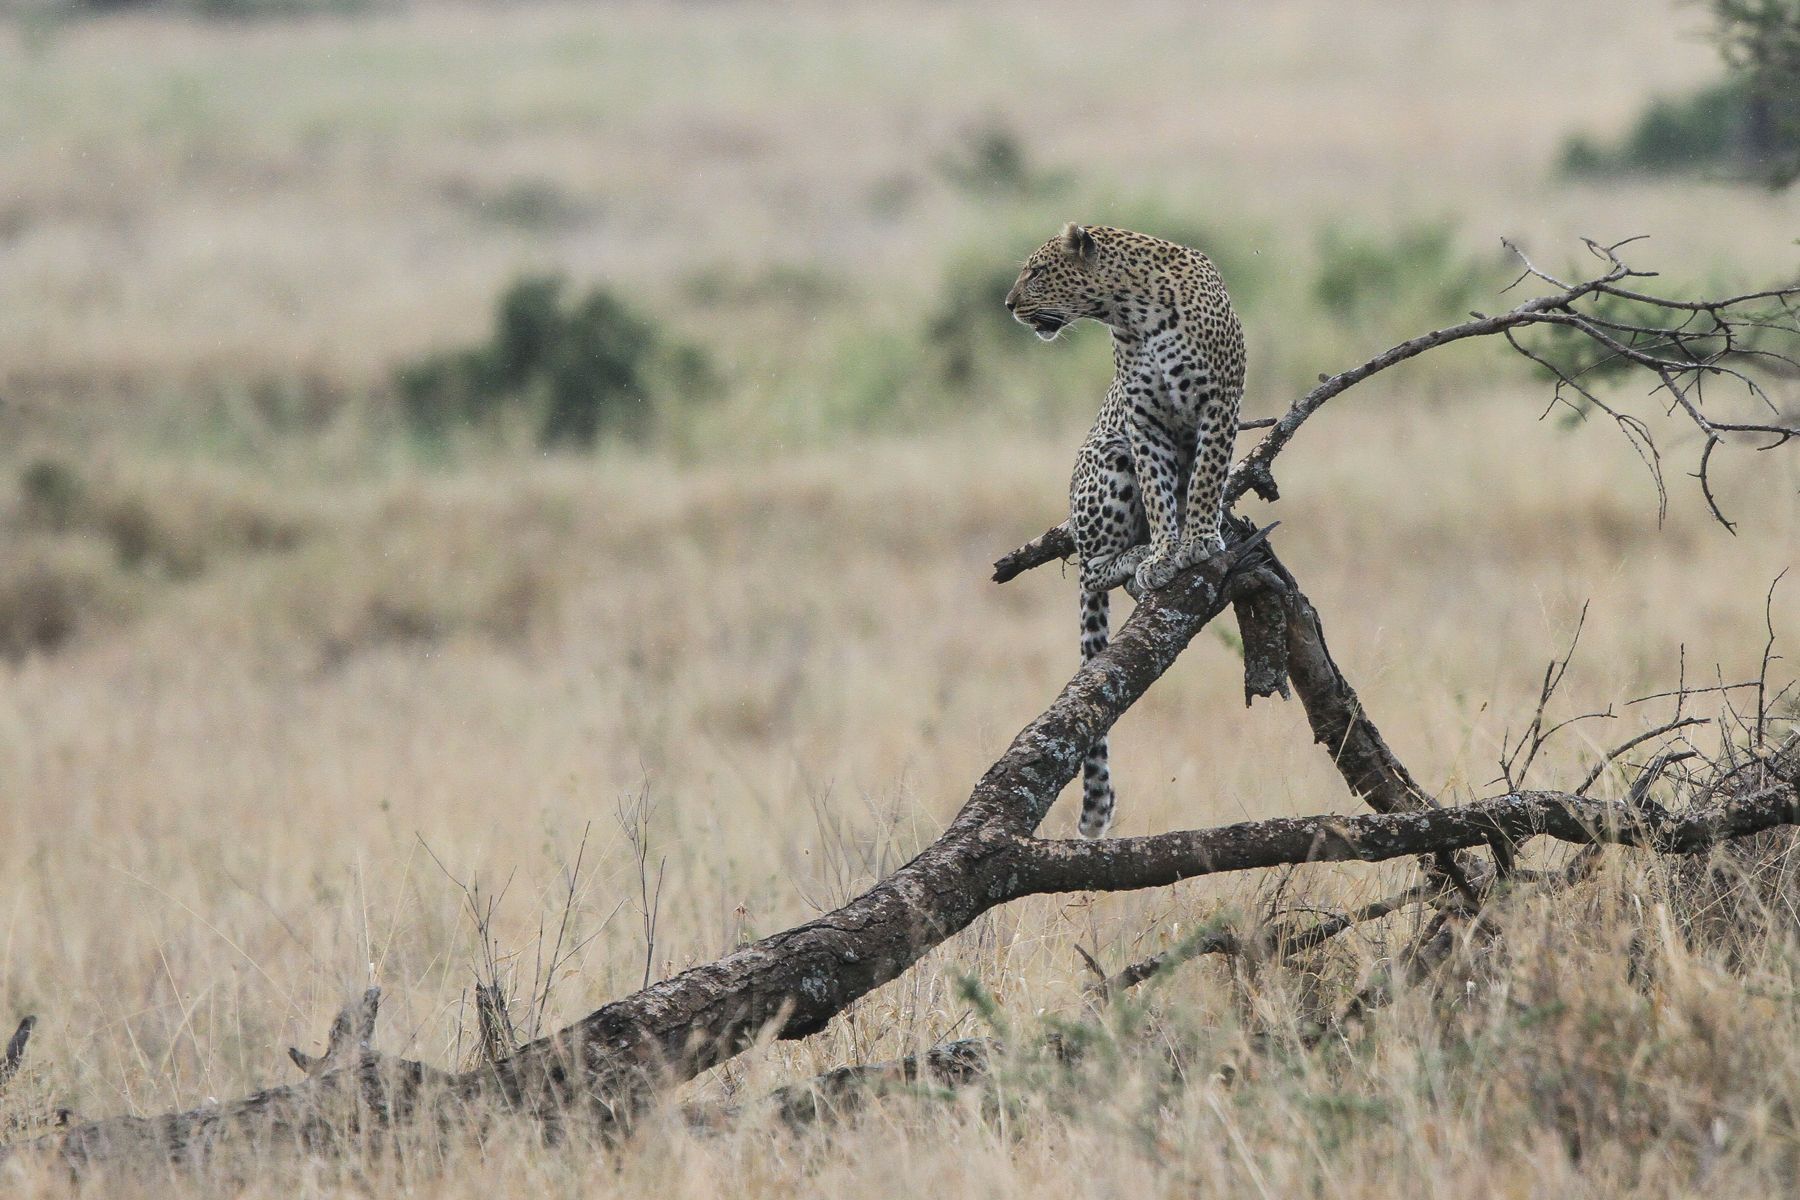 Much shyer than the Lions, the Leopards of Serengeti are also watching for their opportunity